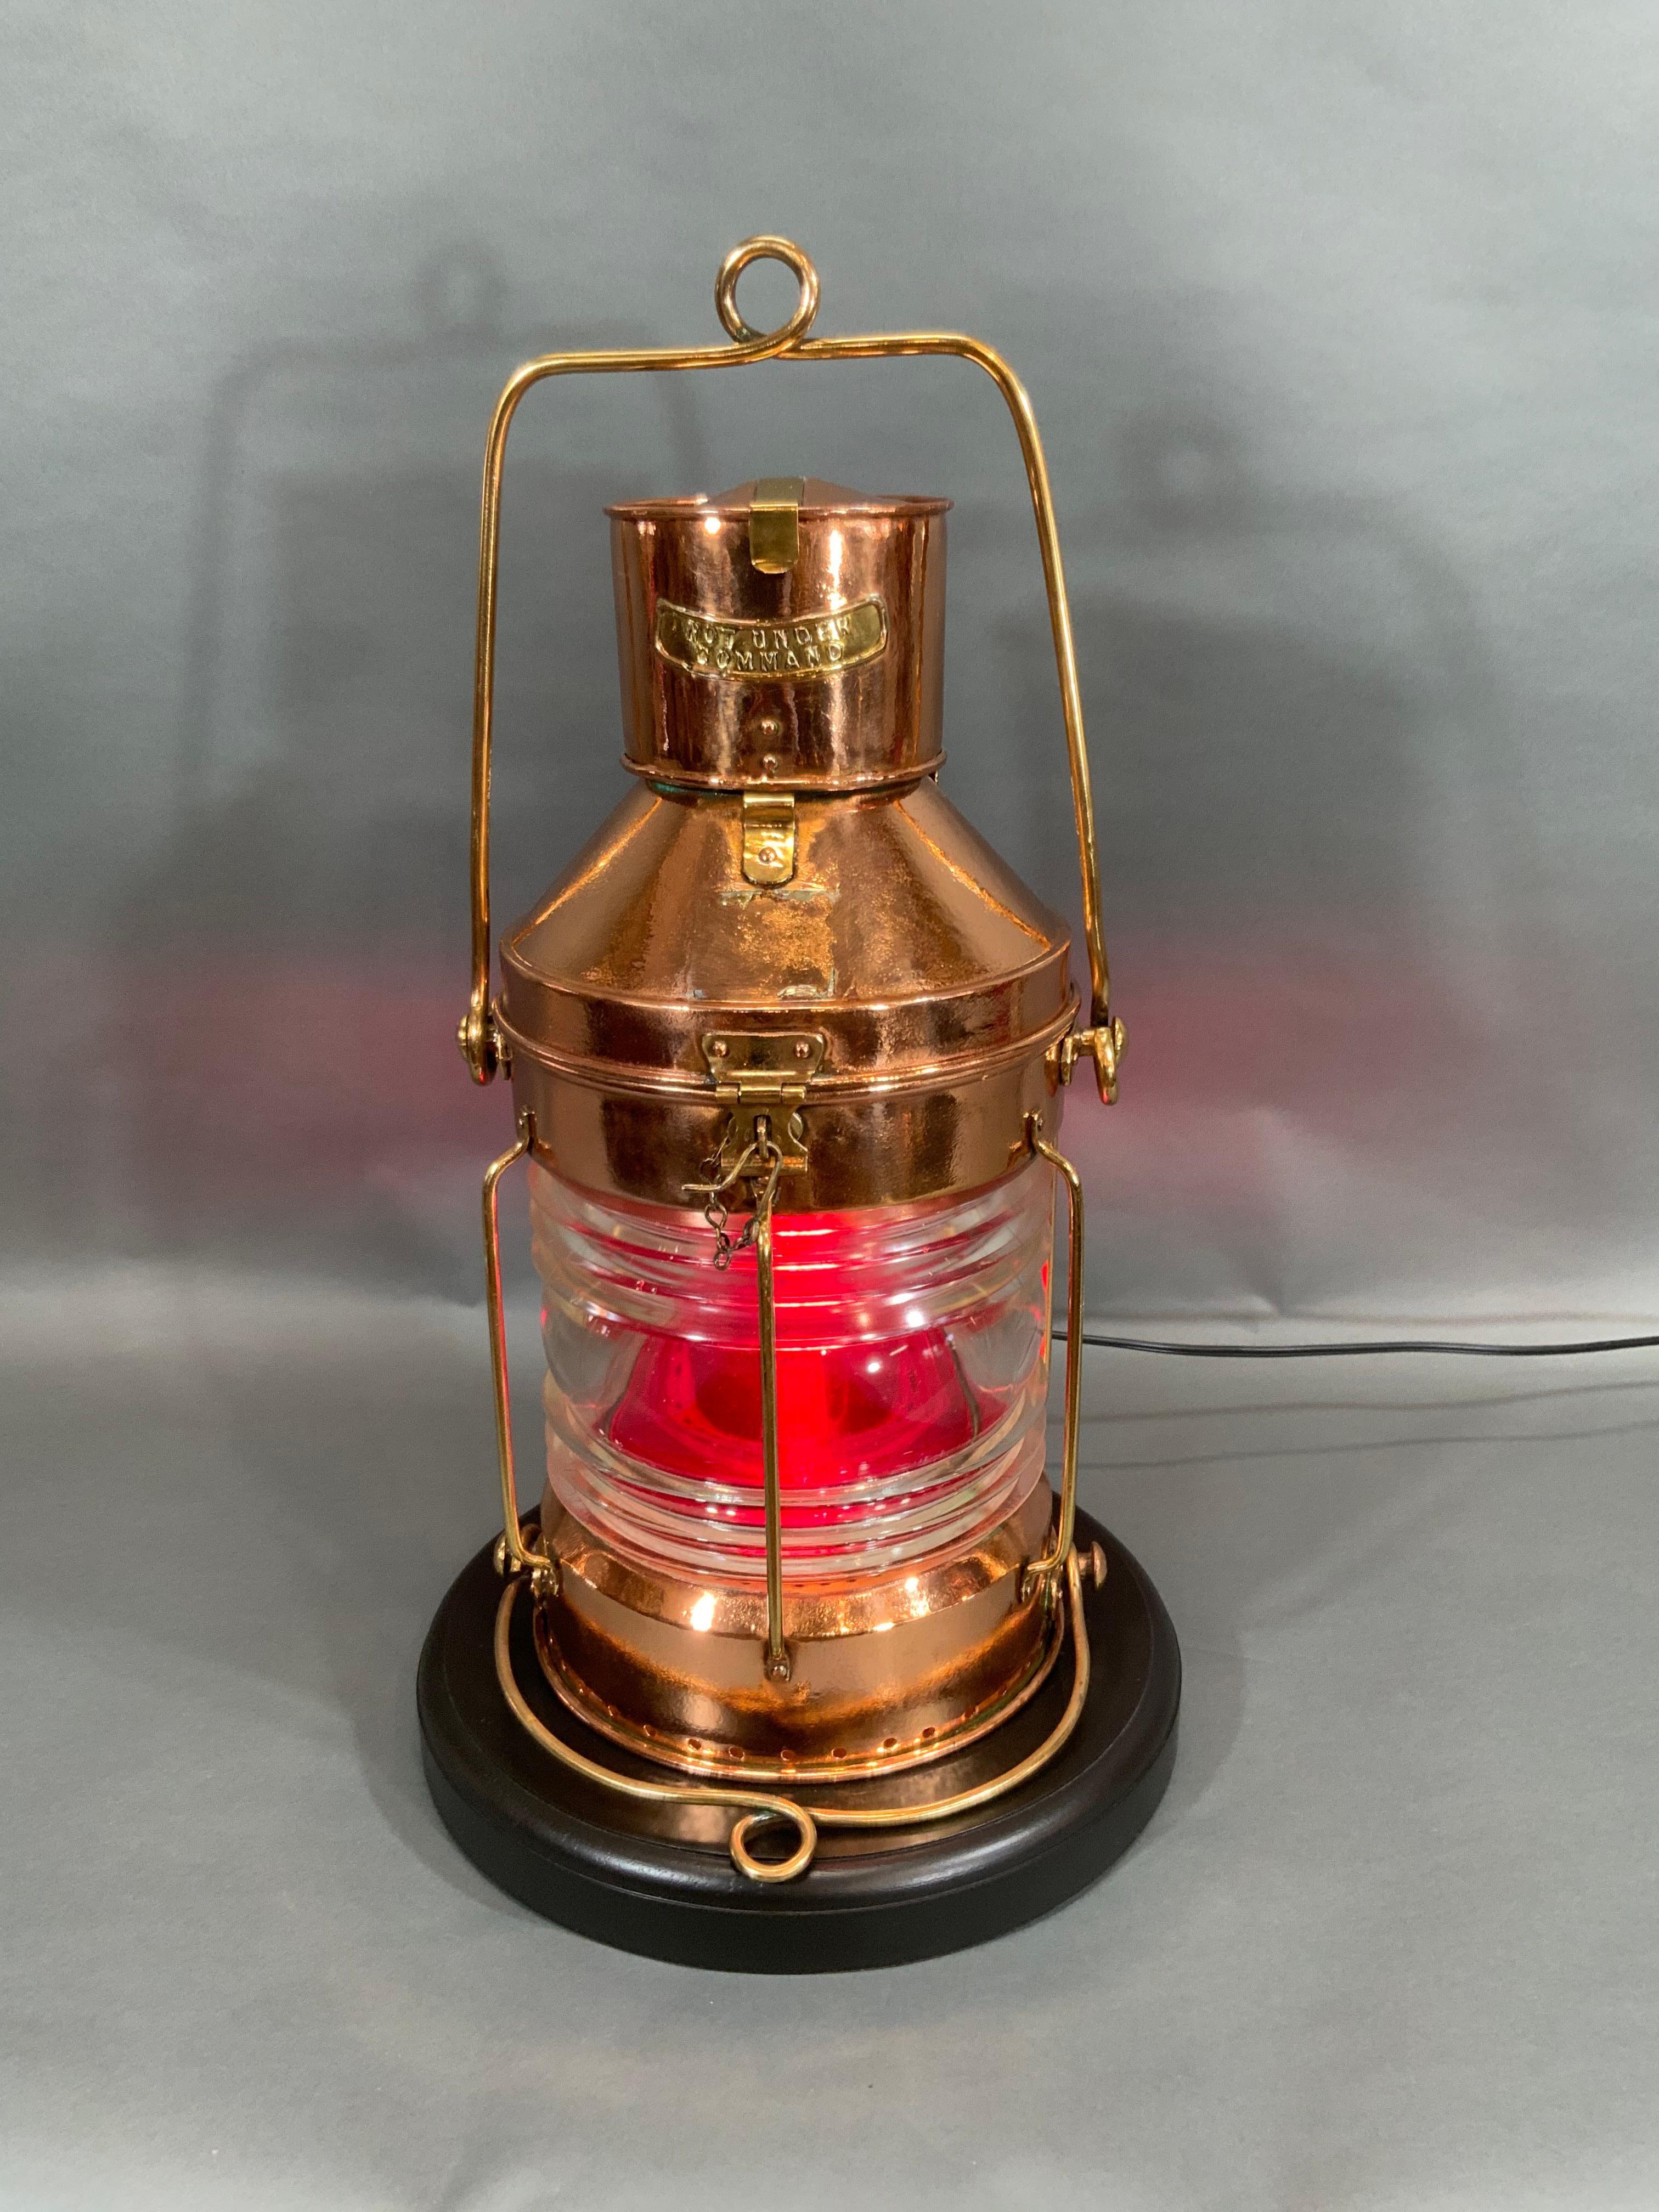 Ships anchor lantern from the English firm 